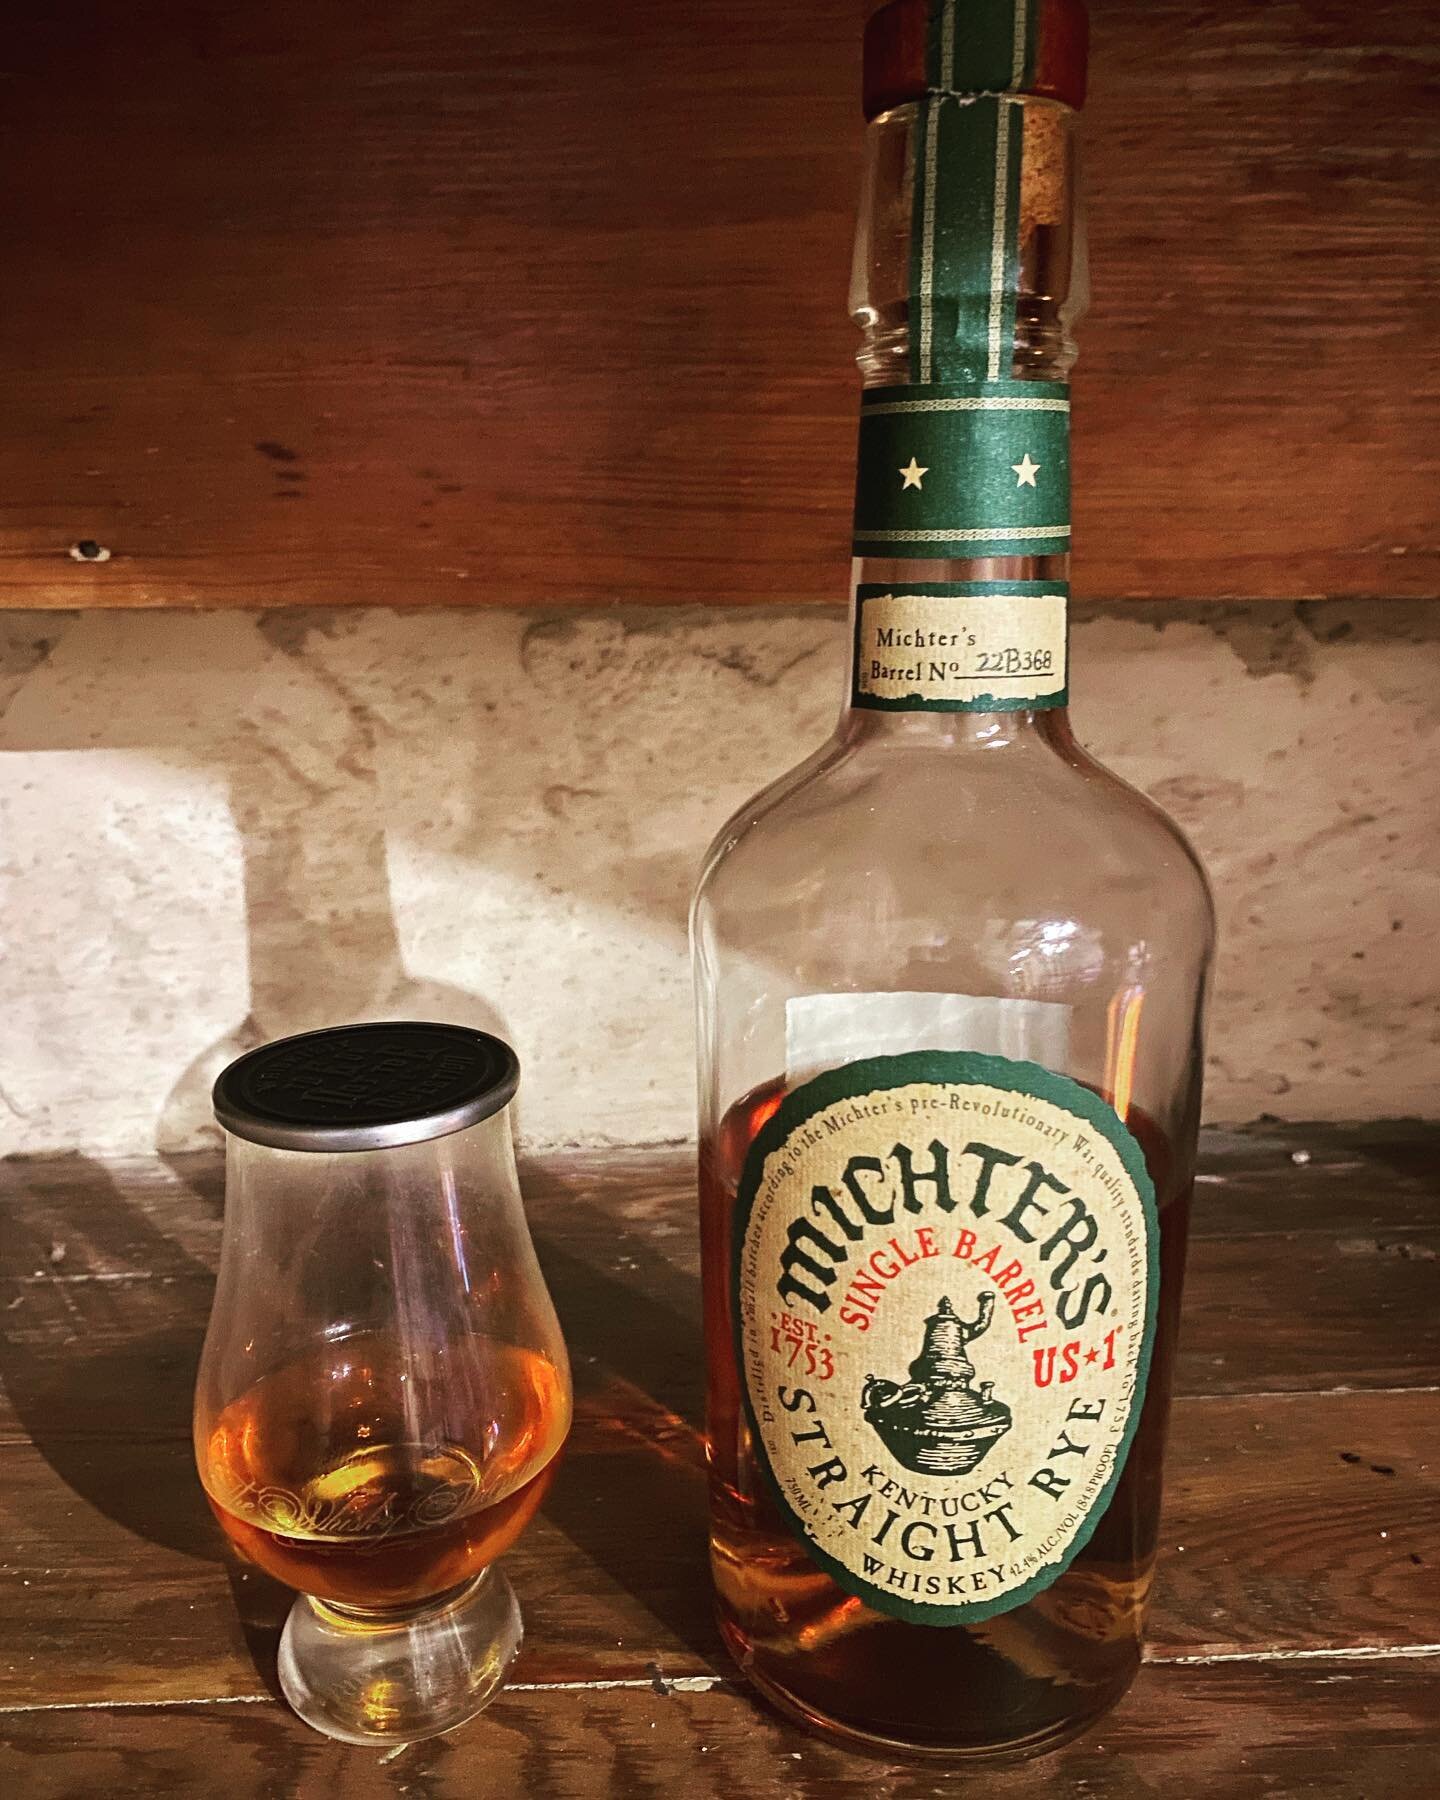 Hey guys let&rsquo;s use this Sunday Deep Dive to get into a rye whiskey.  I have been trying to get into rye for a while now and have found some cool bottles and drams. Tonite we dive into Michters Single Barrel Rye, Barrel 22b368. Bottled at a stra